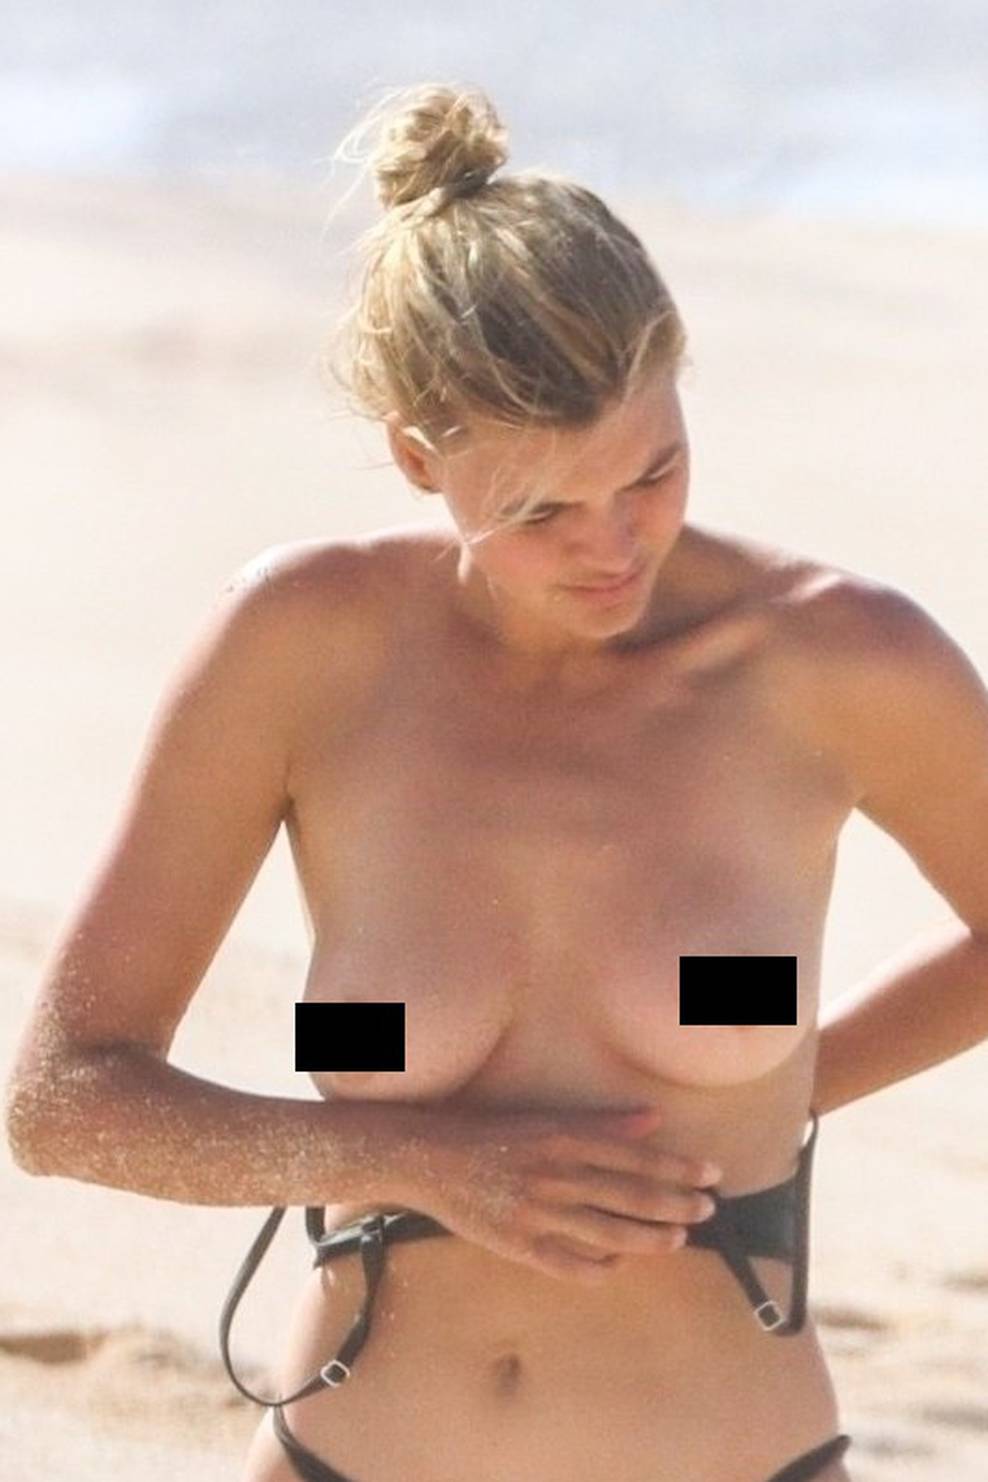 *PREMIUM-EXCLUSIVE* Sports Illustrated Swimsuit model  Kelly Rohrbach goes Topless by the ocean